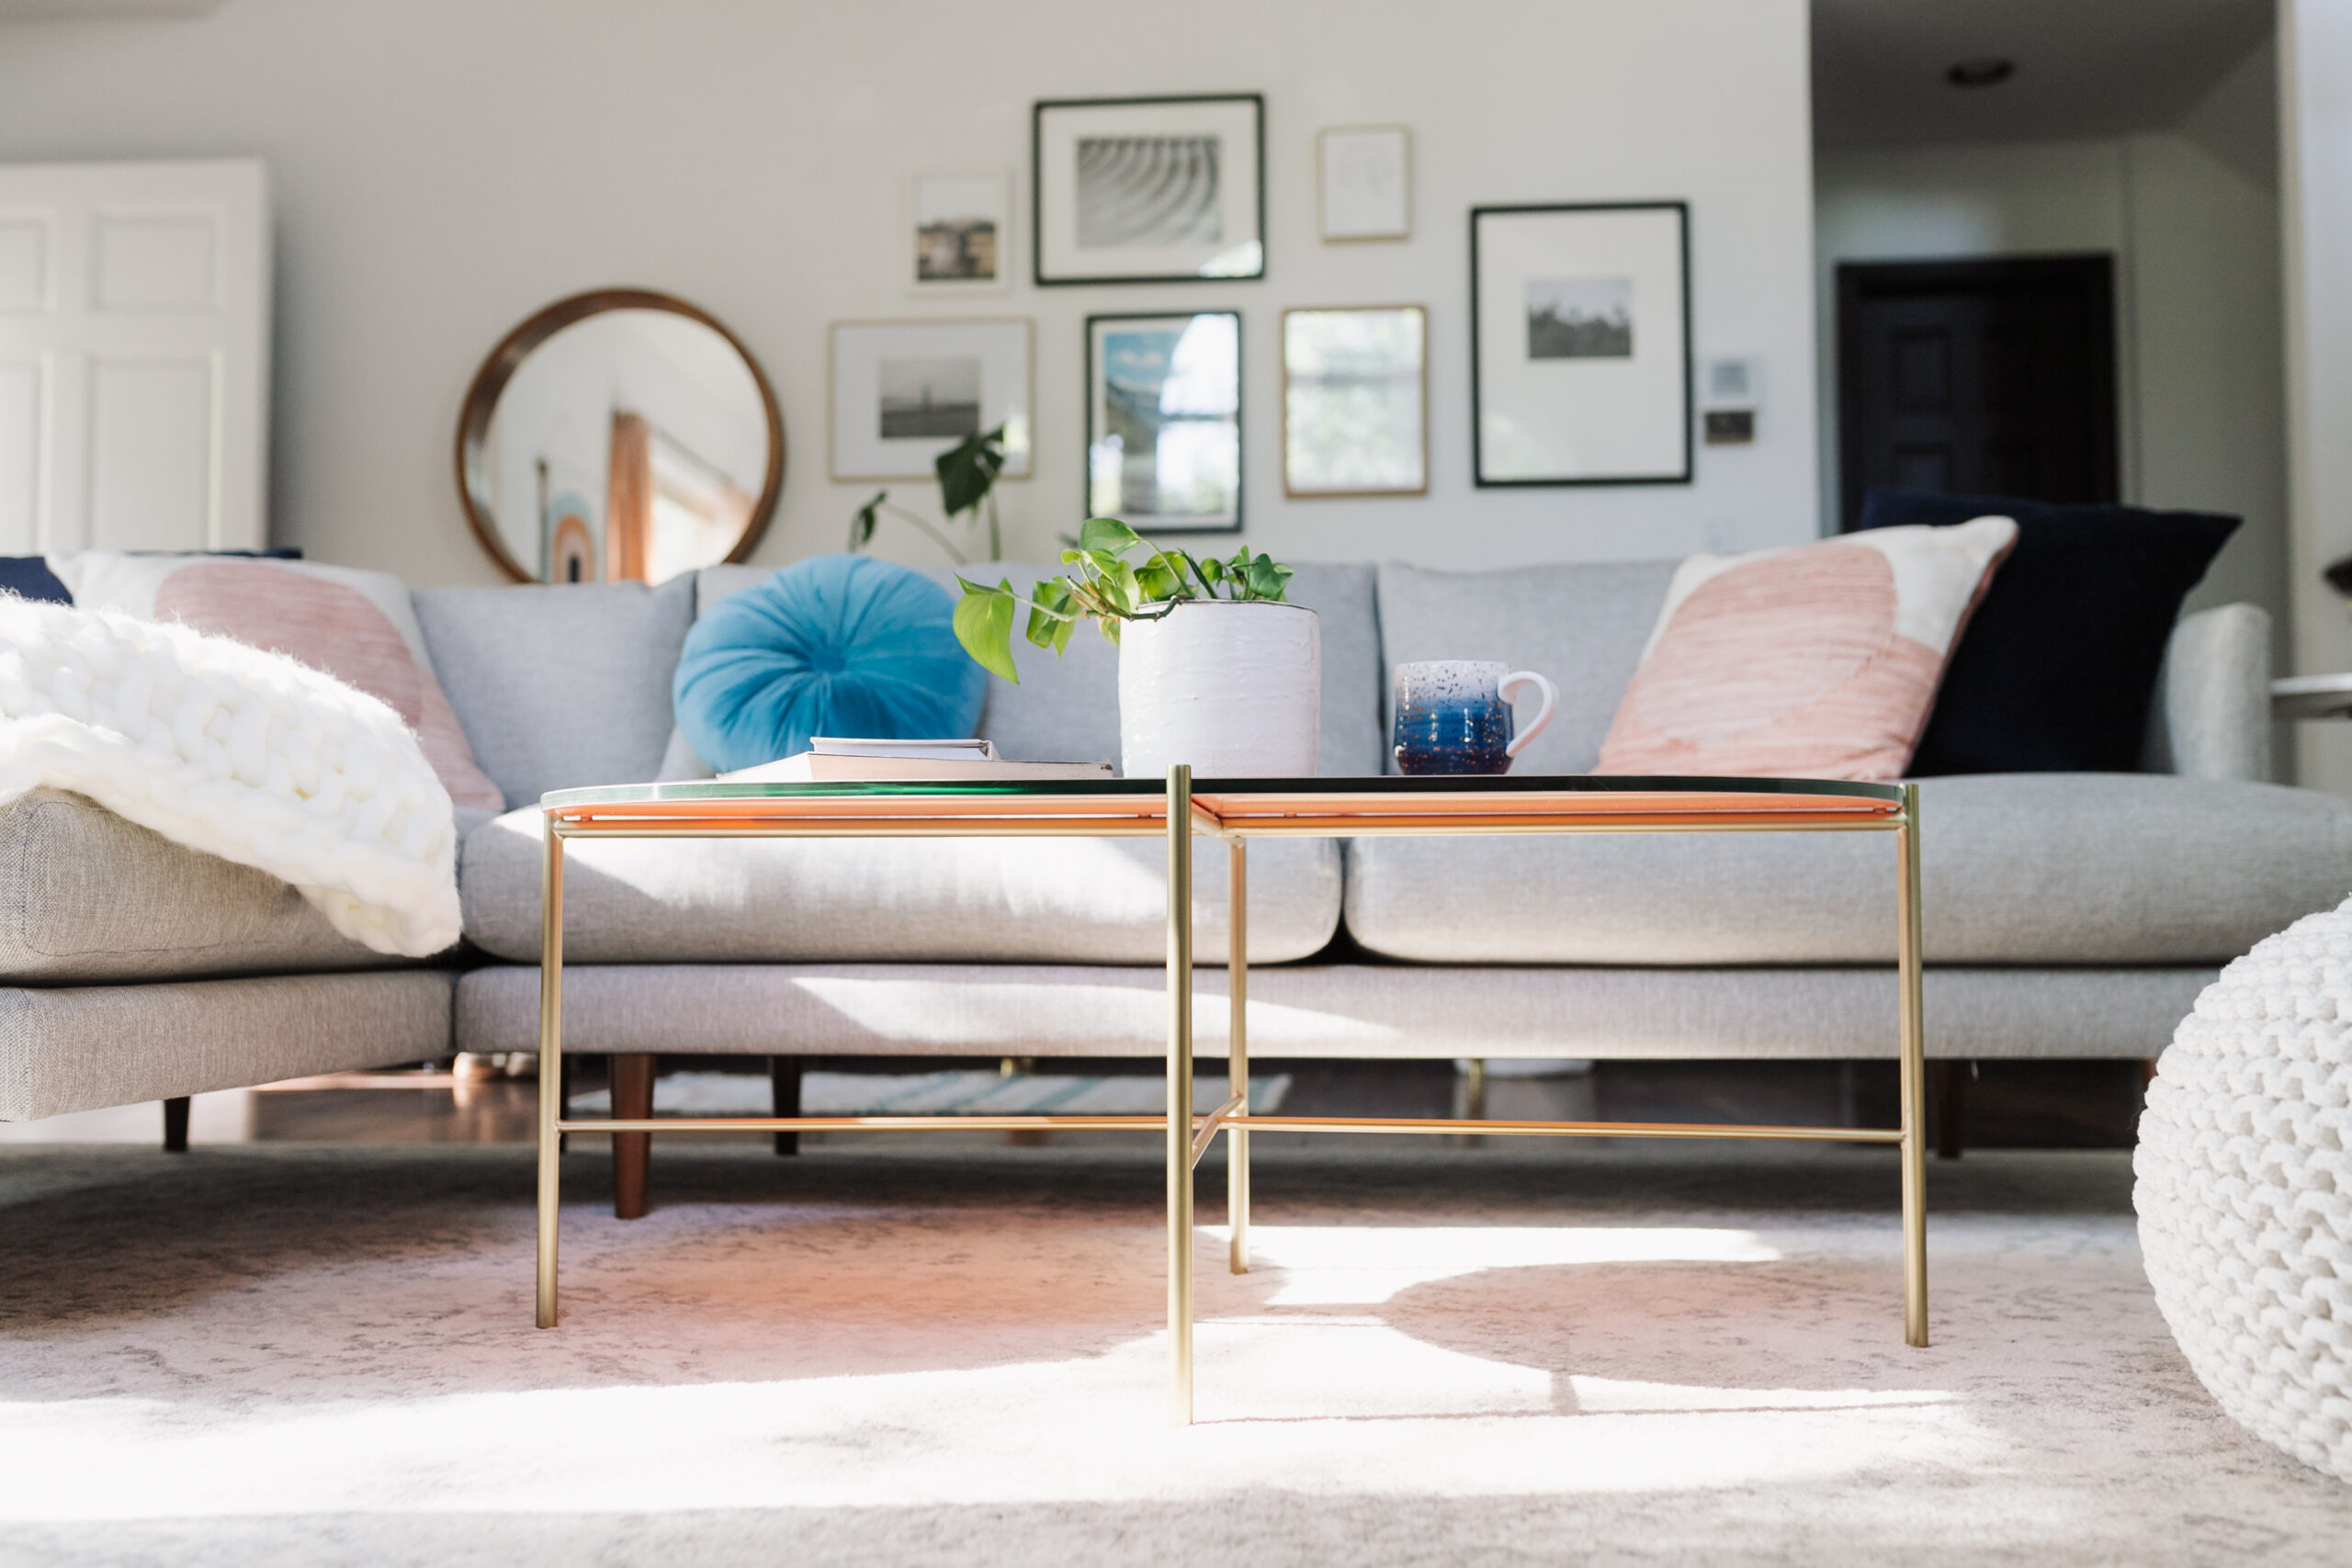 the gold legs and soft pink glass top add the perfect feminine touch to this modern mountain living room #theldlhome #ourarticle #silicusoblingcoffeetable #coffeetable #feminine #livingroom